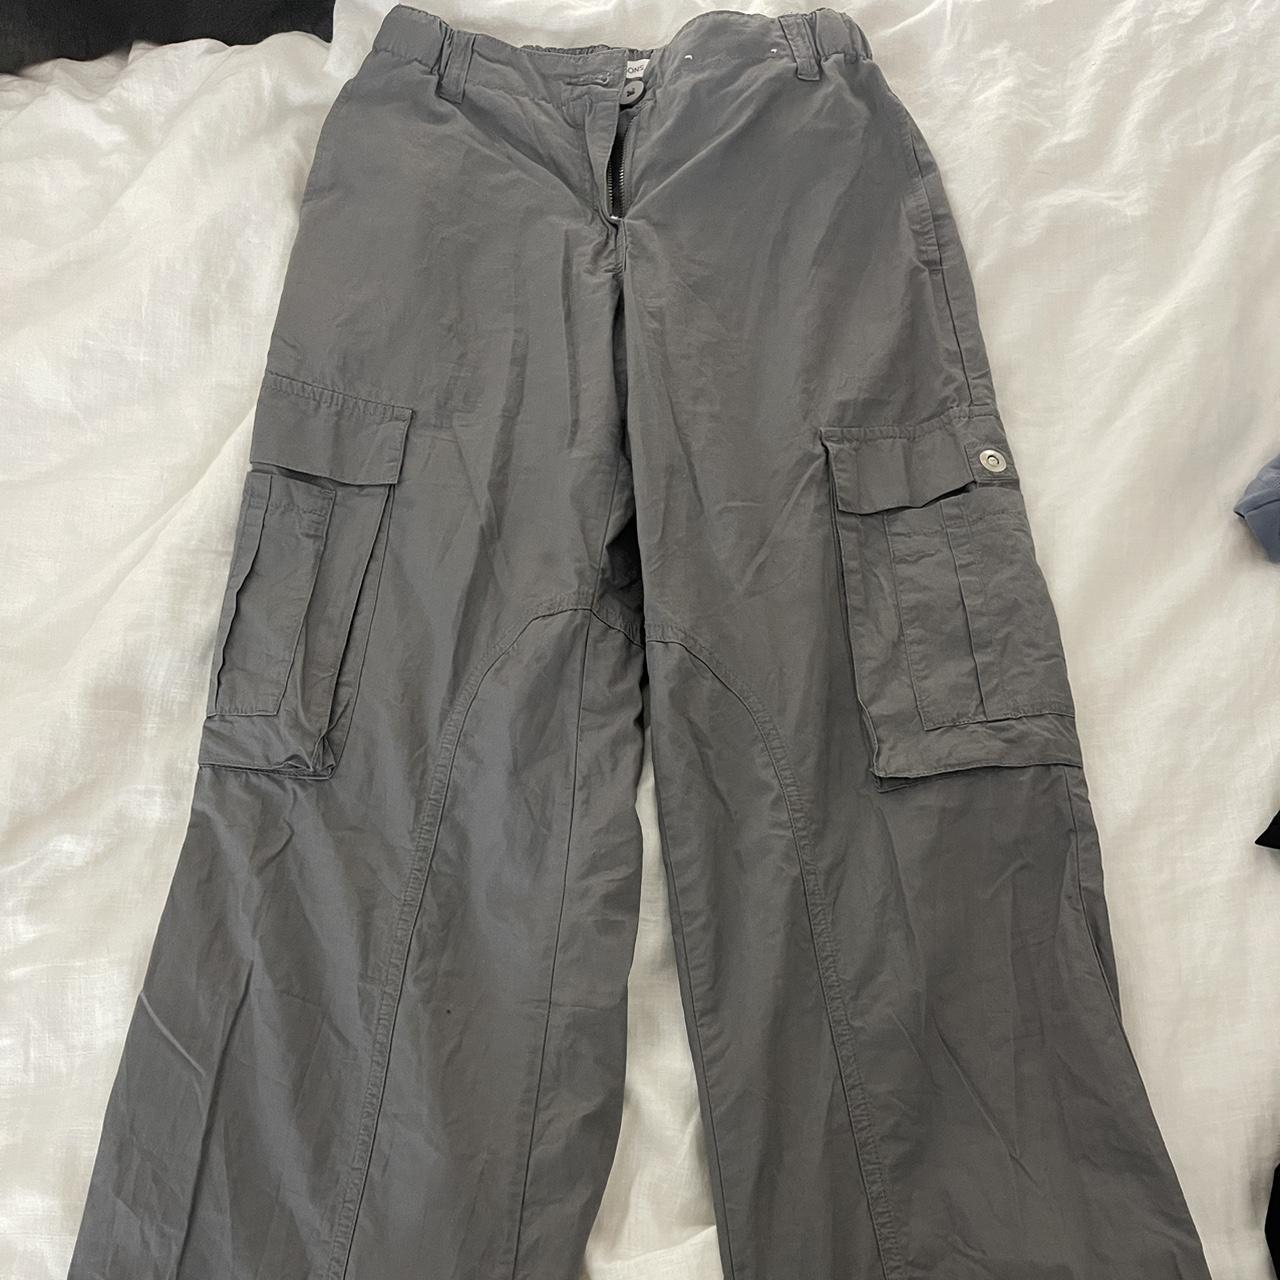 Glassons cargos Size 6 very on trend - Depop